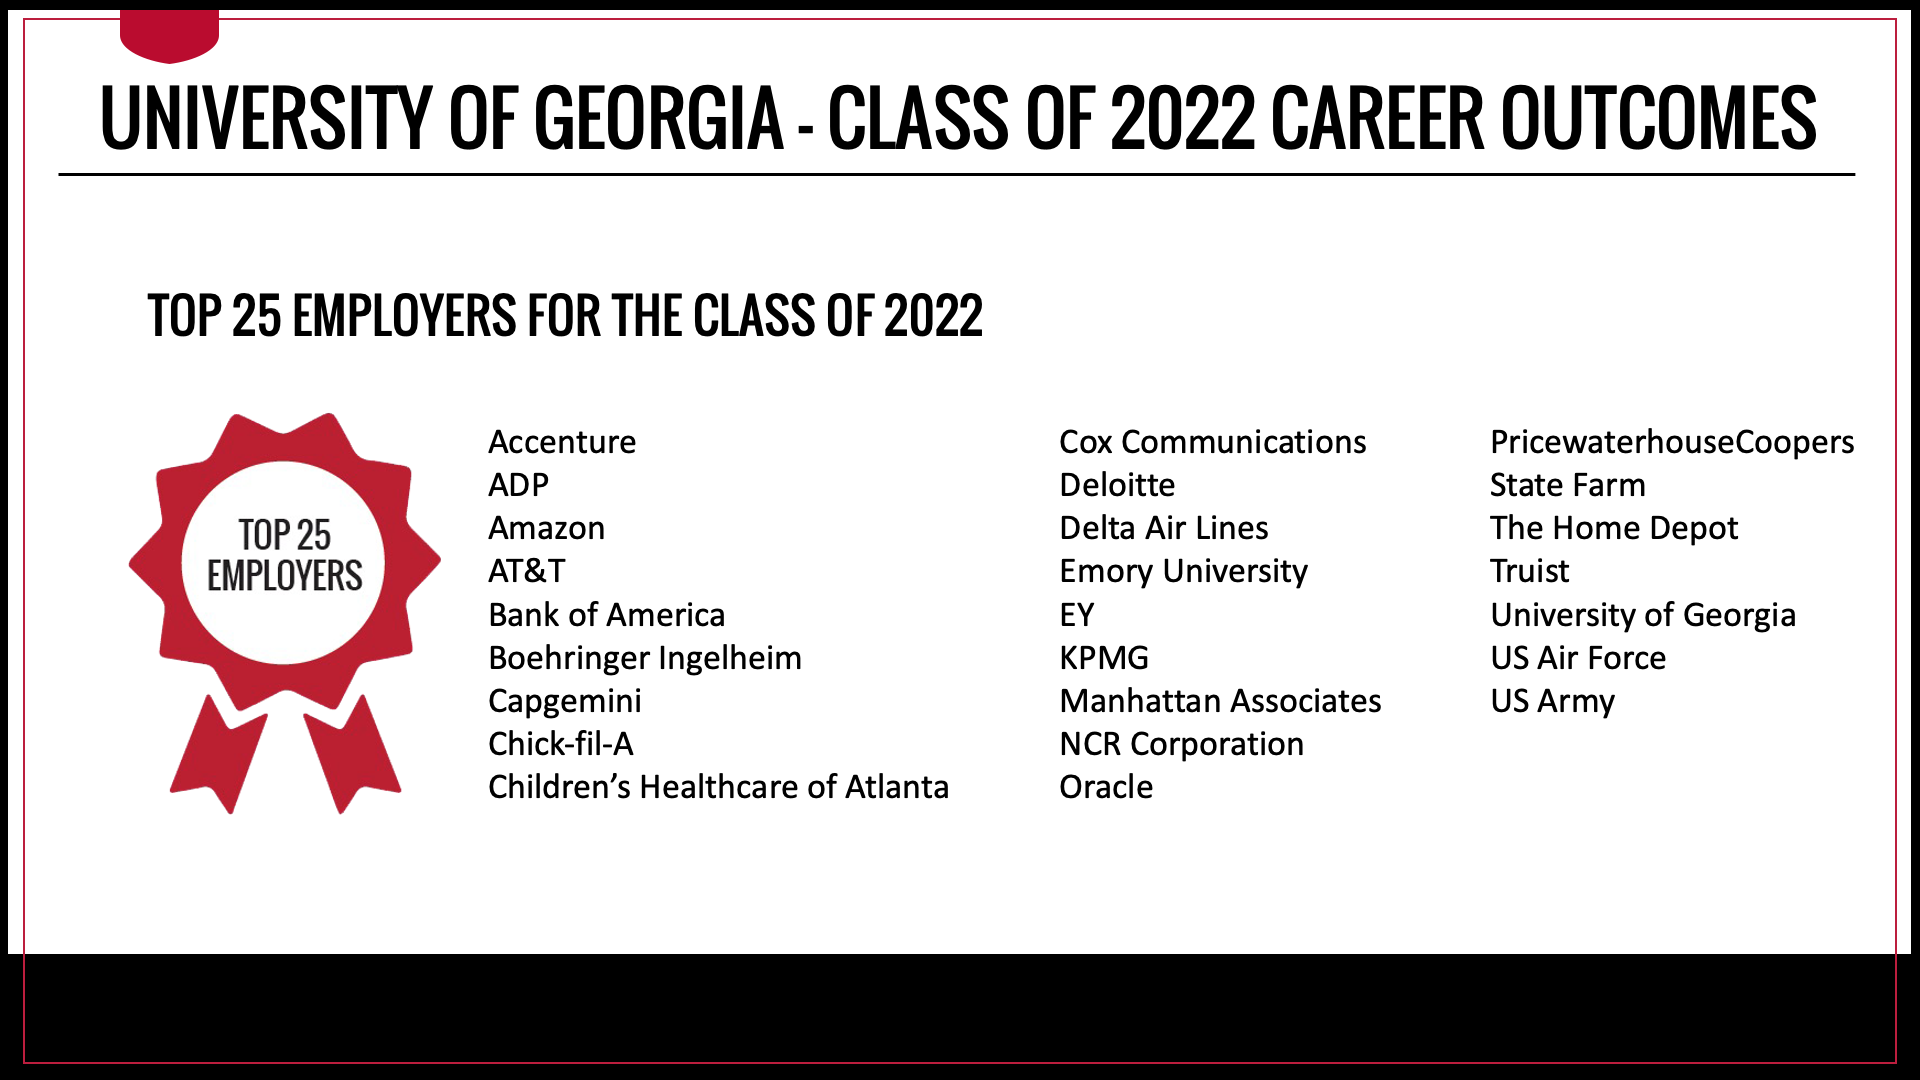 The top employers for UGA Class of 2022 graduates were Accenture, ADP, Amazon, AT&T, Bank of America, Boehringer Ingelheim, Capgemini, Chick-fil-A, Children’s Healthcare of Atlanta, Cox Communications, Deloitte, Delta Air Lines, Emory University, EY, KPMG, Manhattan Associates, NCR Corporation, Oracle, PricewaterhouseCoopers, State Farm, The Home Depot, Truist, University of Georgia, US Air Force, and US Army